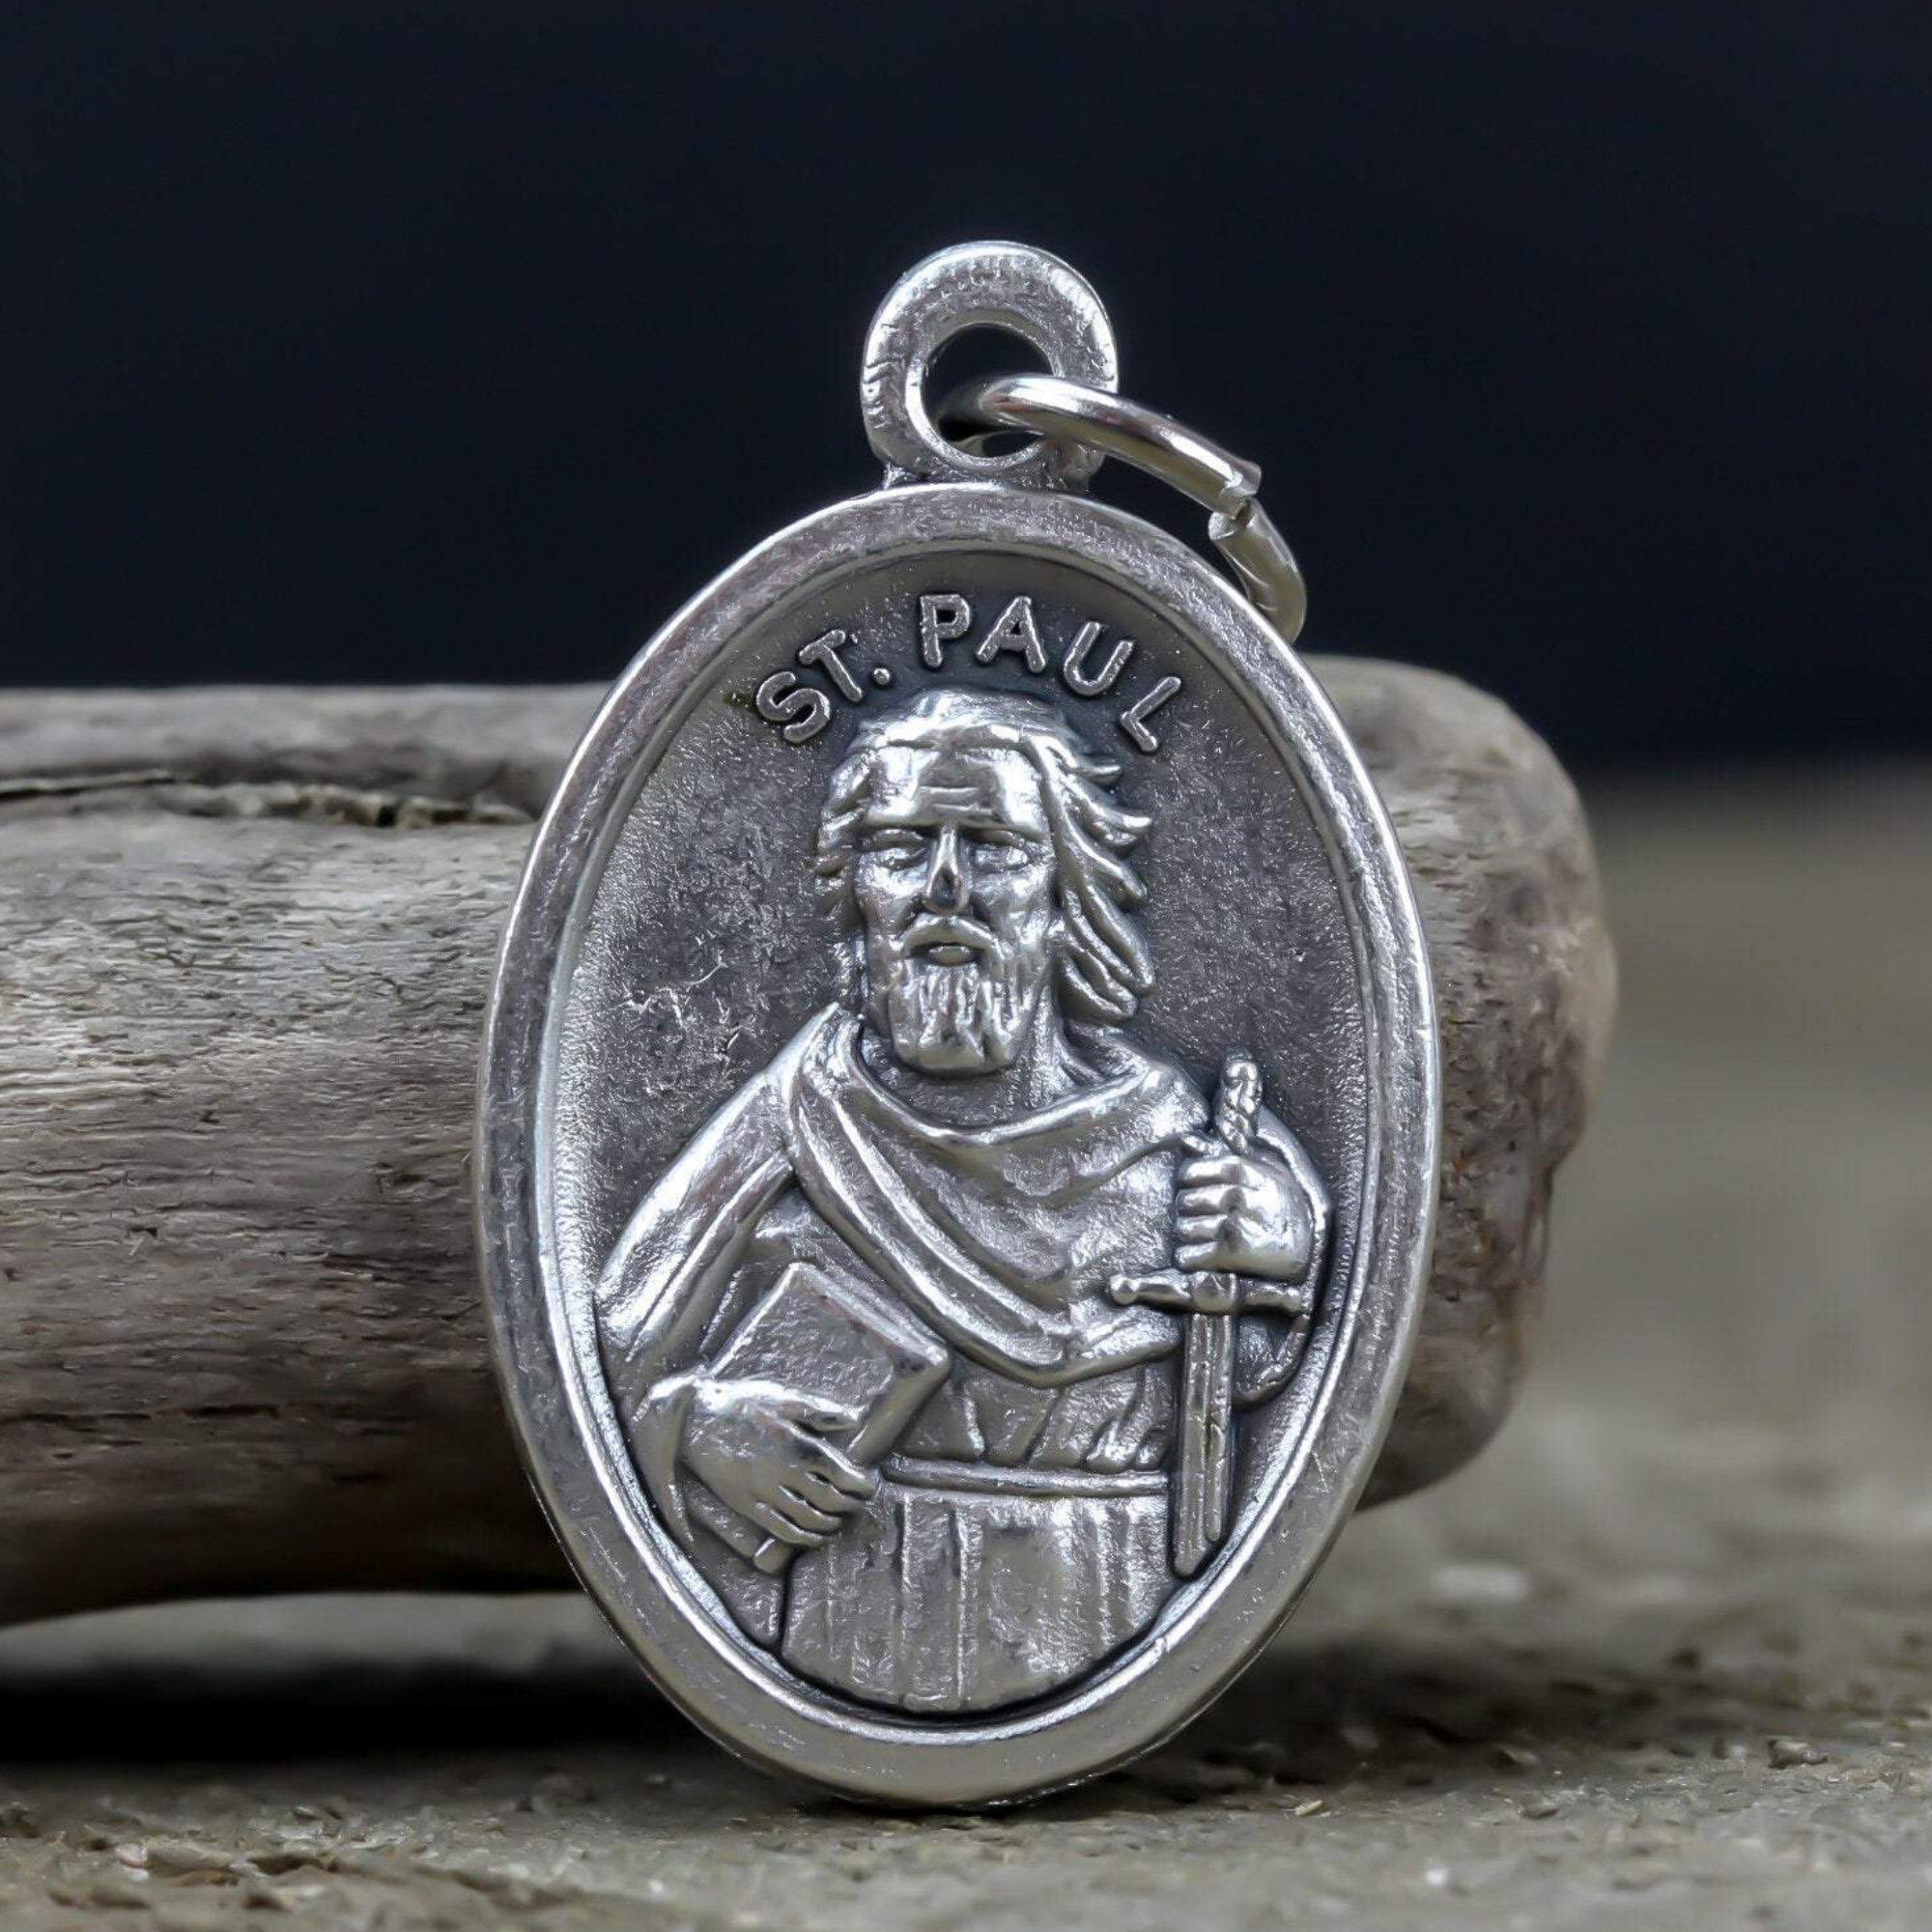 Saint Paul the Apostle die cast silver tone one inch oval medal